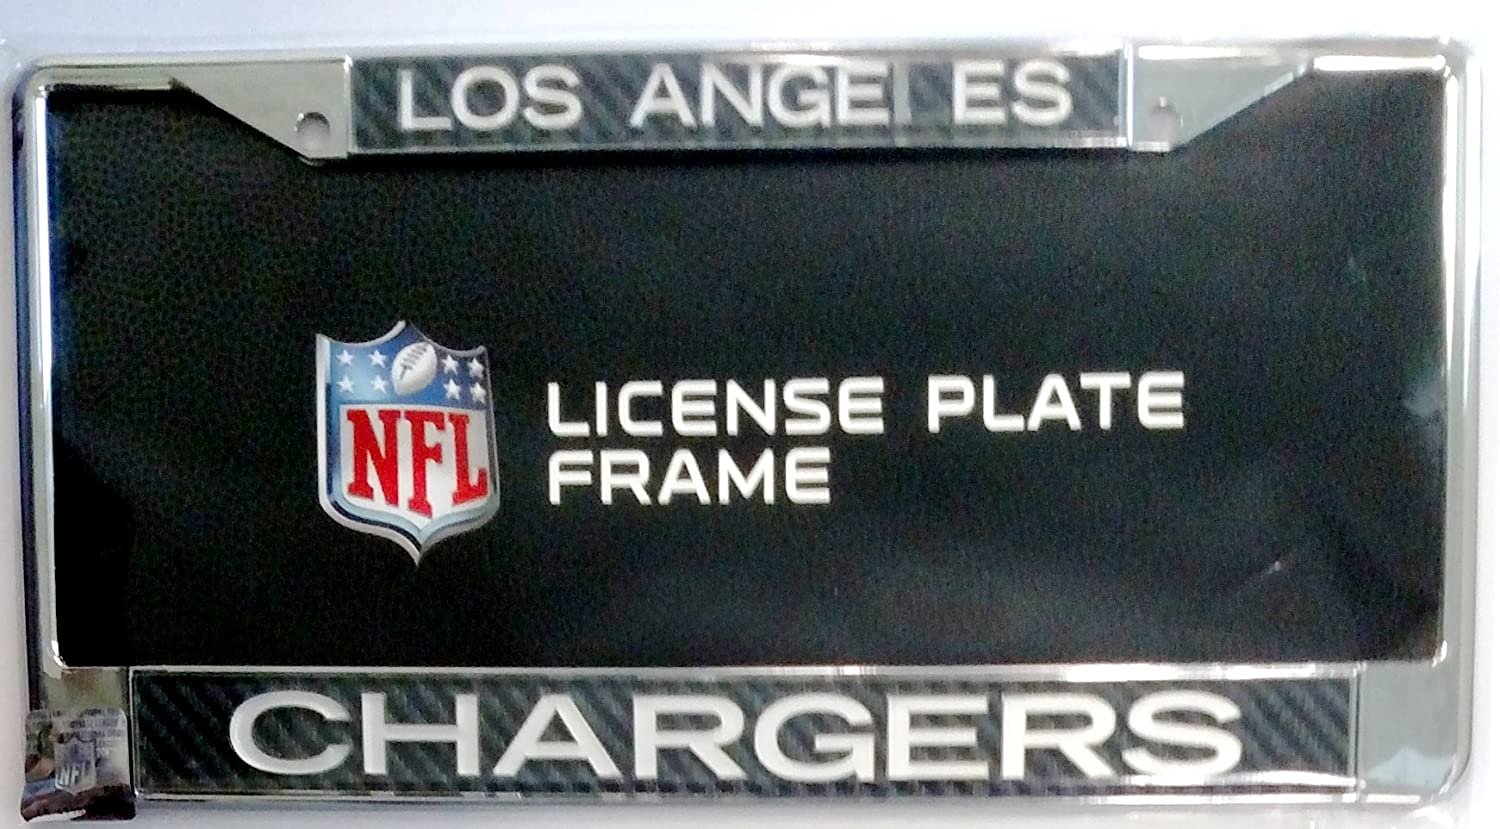 Los Angeles Chargers Metal License Plate Frame Chrome Tag Cover, Carbon Fiber Design, Laser Acrylic Inserts, 12x6 Inch